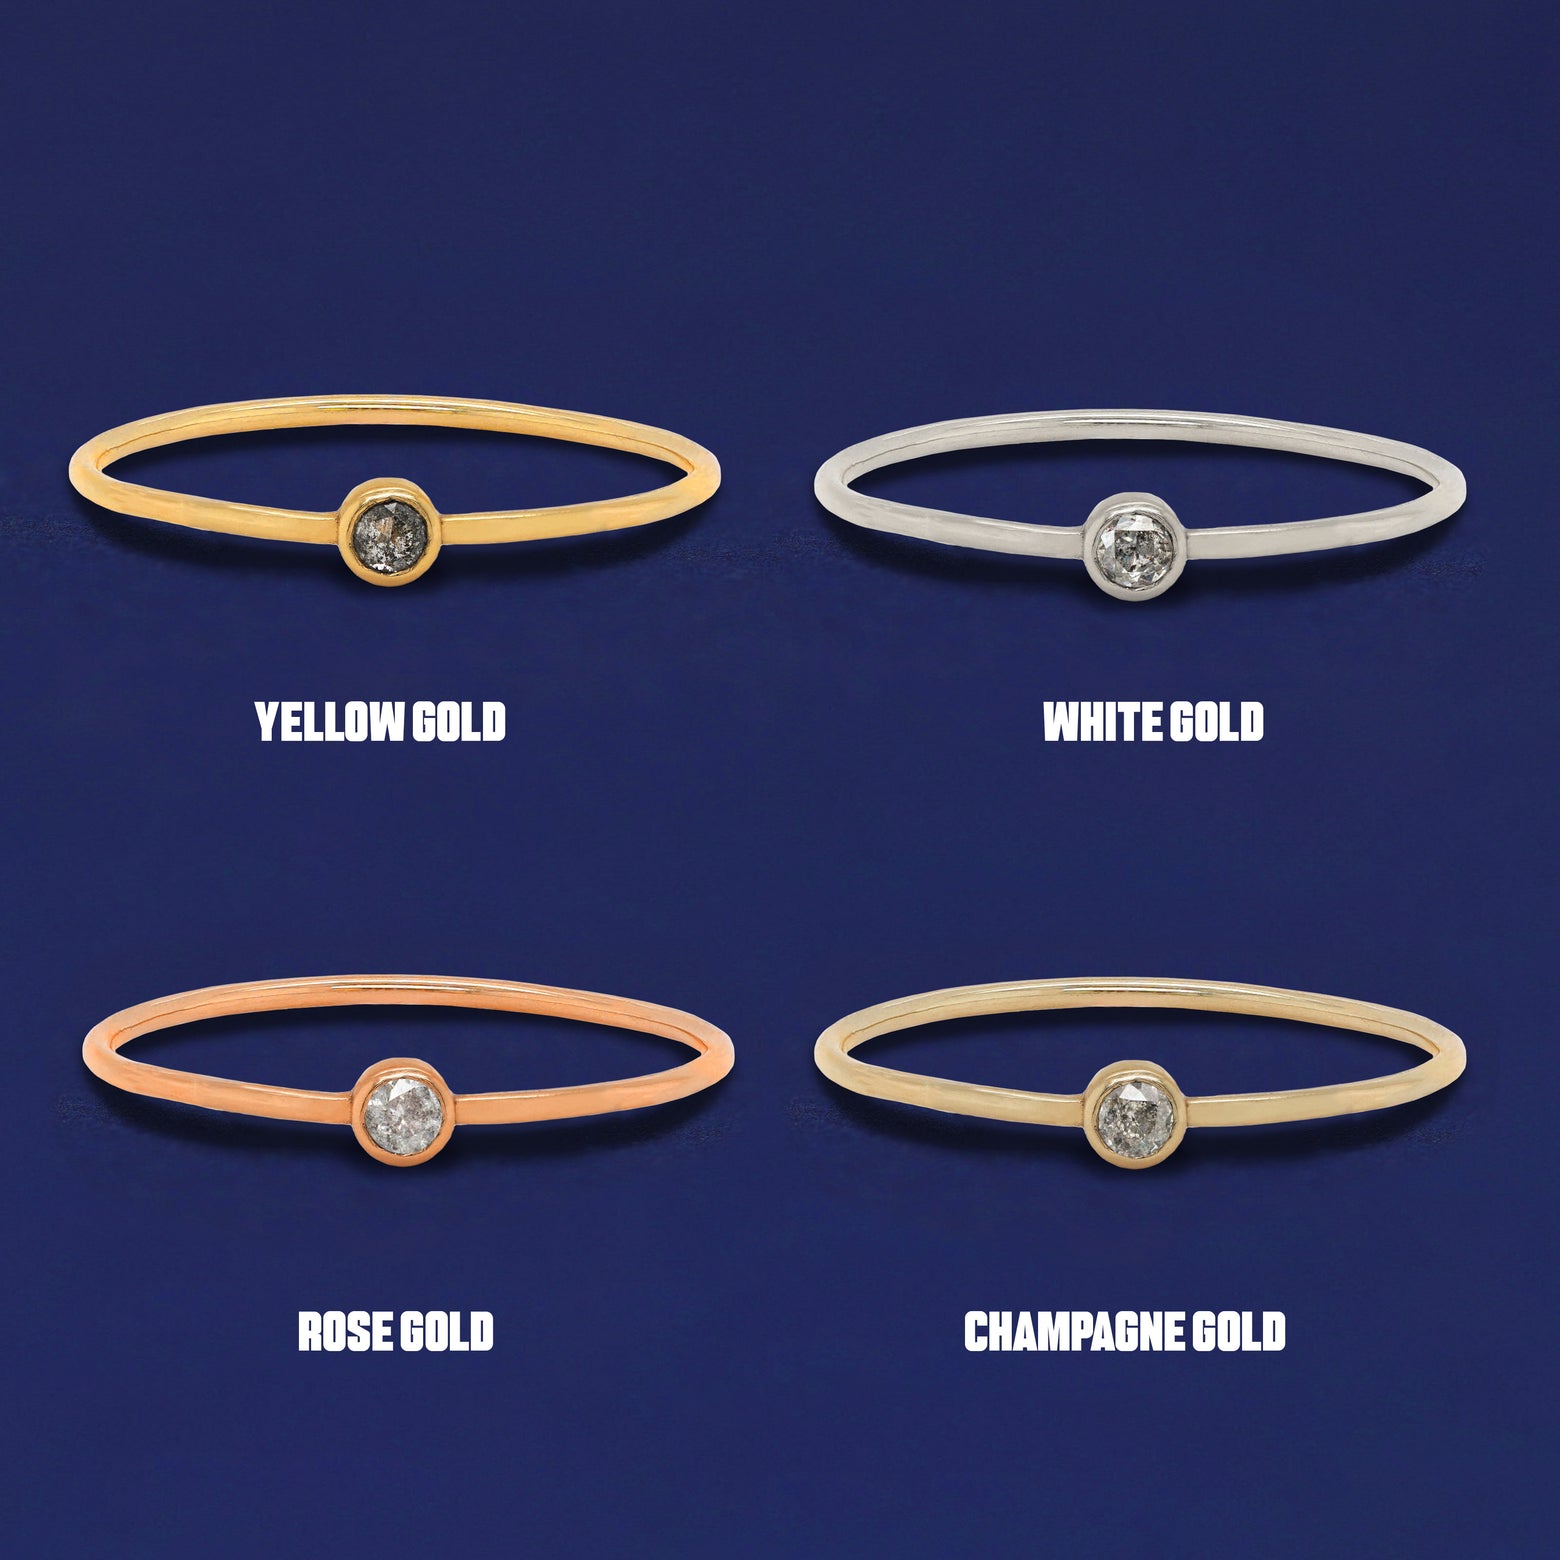 Four versions of the Salt and Pepper Diamond Ring shown in options of yellow, white, rose and champagne gold